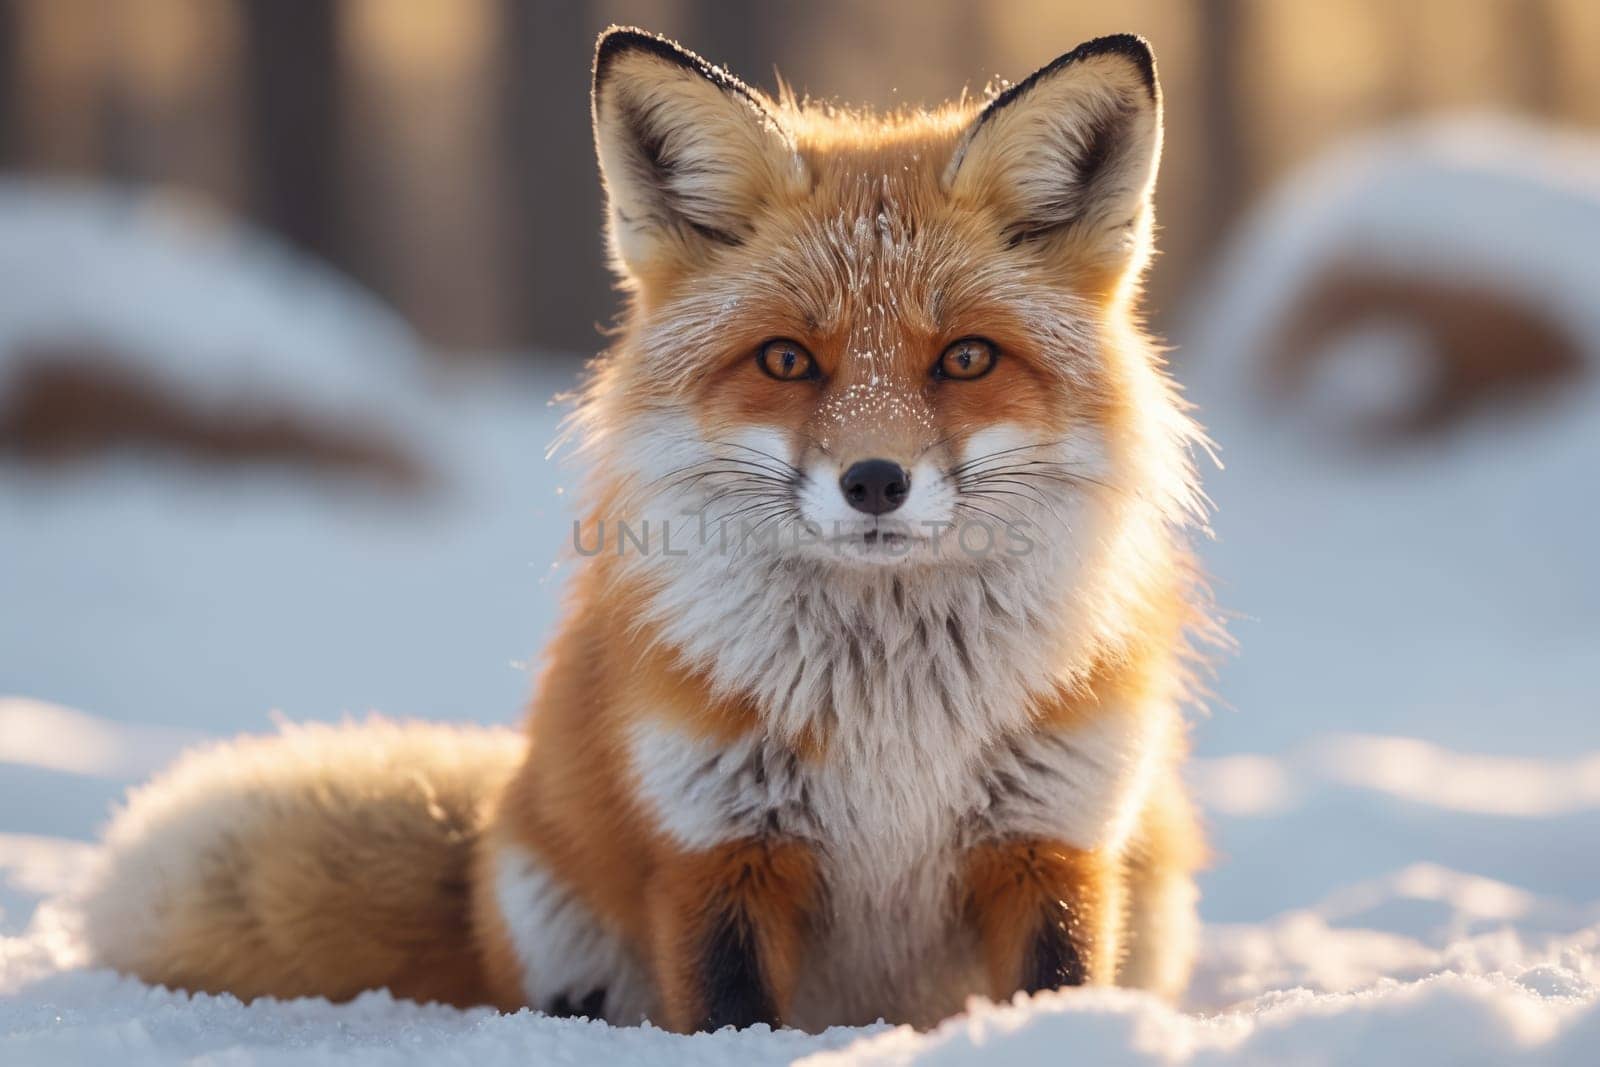 Winter's Camouflage: Red Fox Poised in Snowy Stillness by Andre1ns